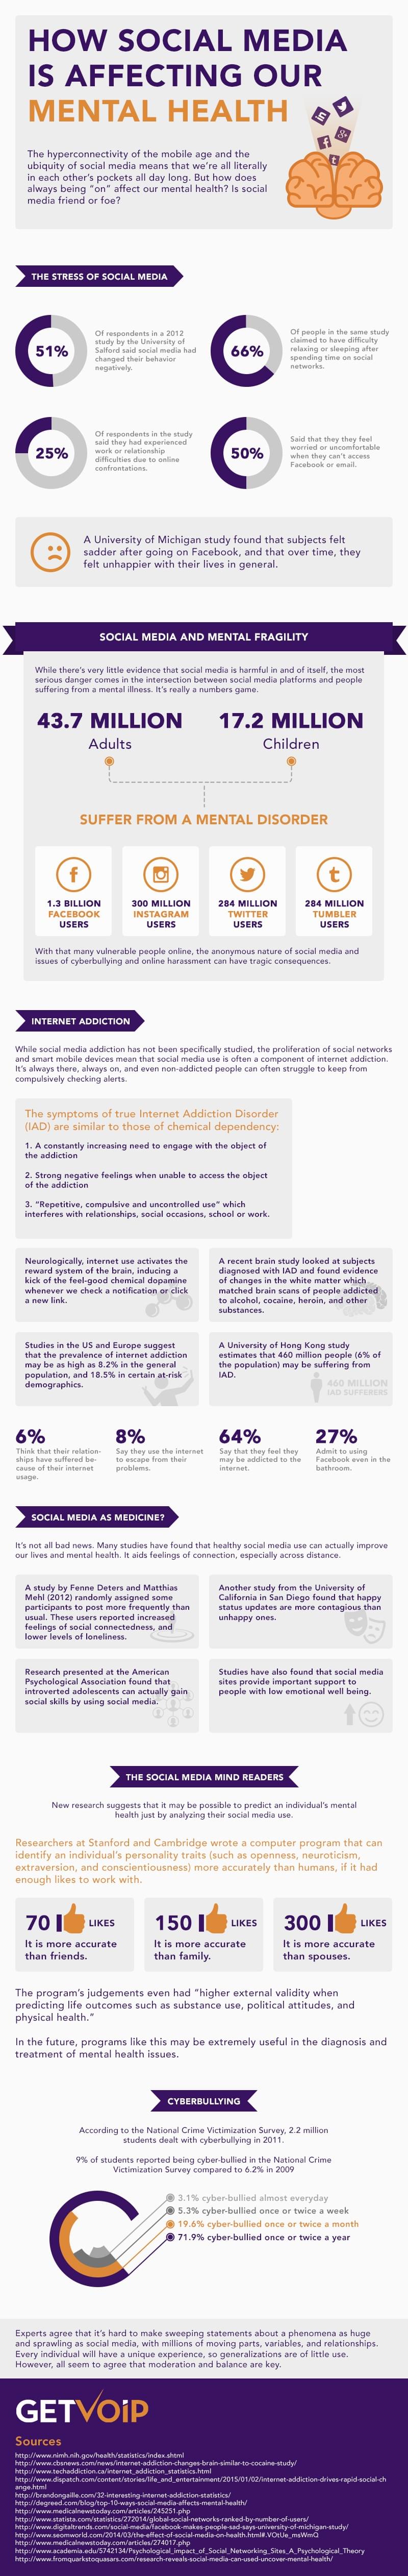 How Social Media is Affecting Our Mental Health [Infographic]